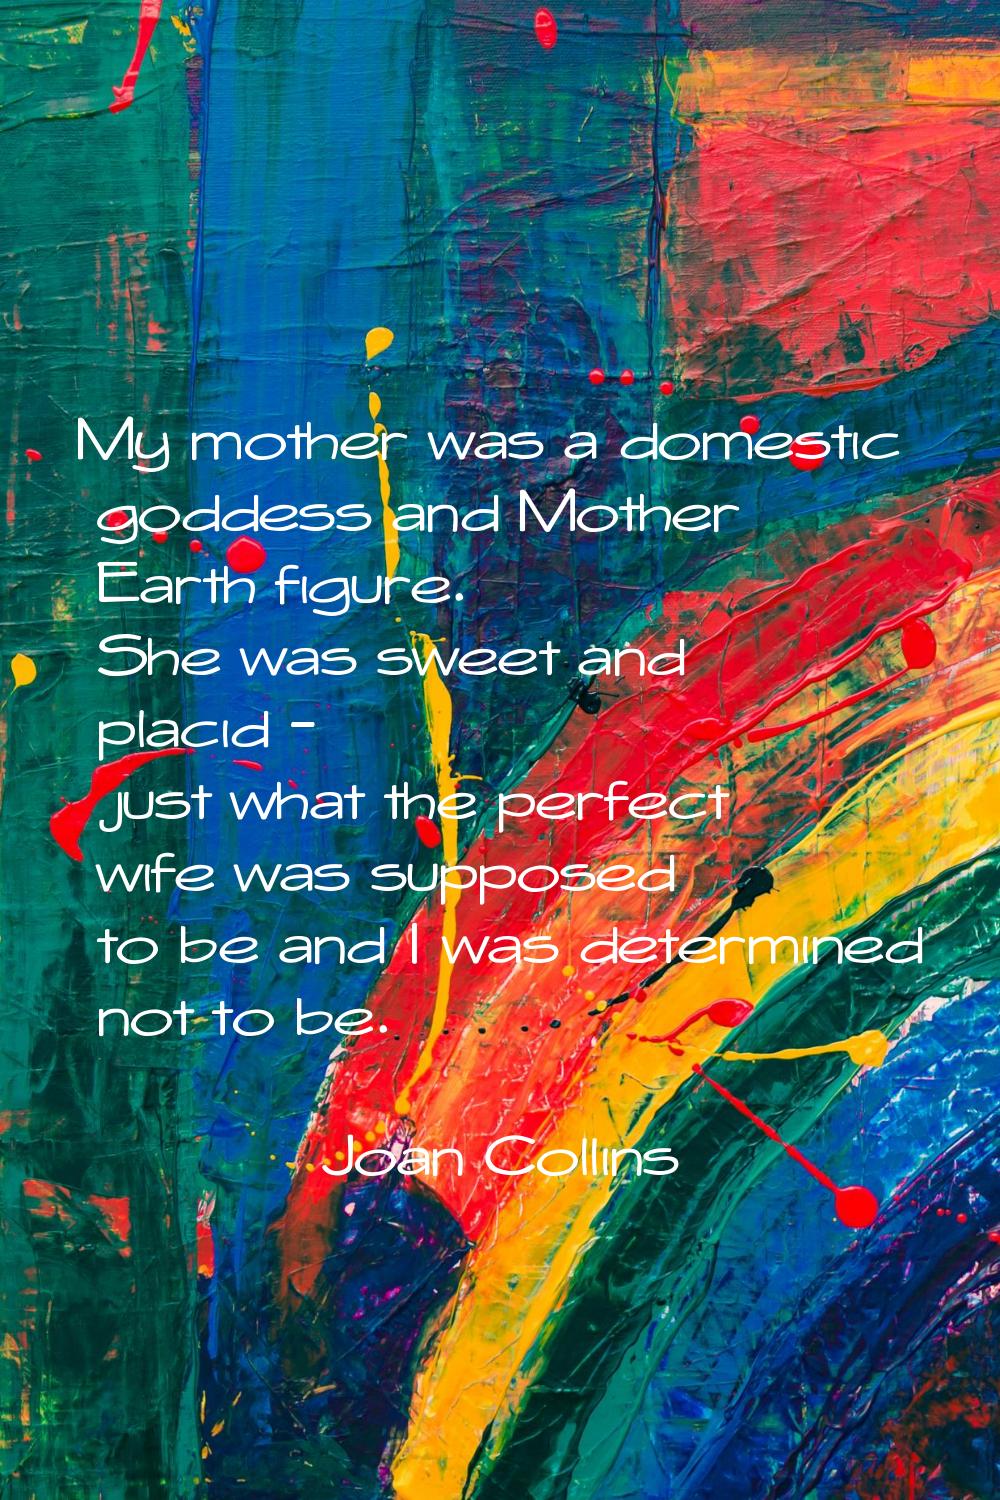 My mother was a domestic goddess and Mother Earth figure. She was sweet and placid - just what the 